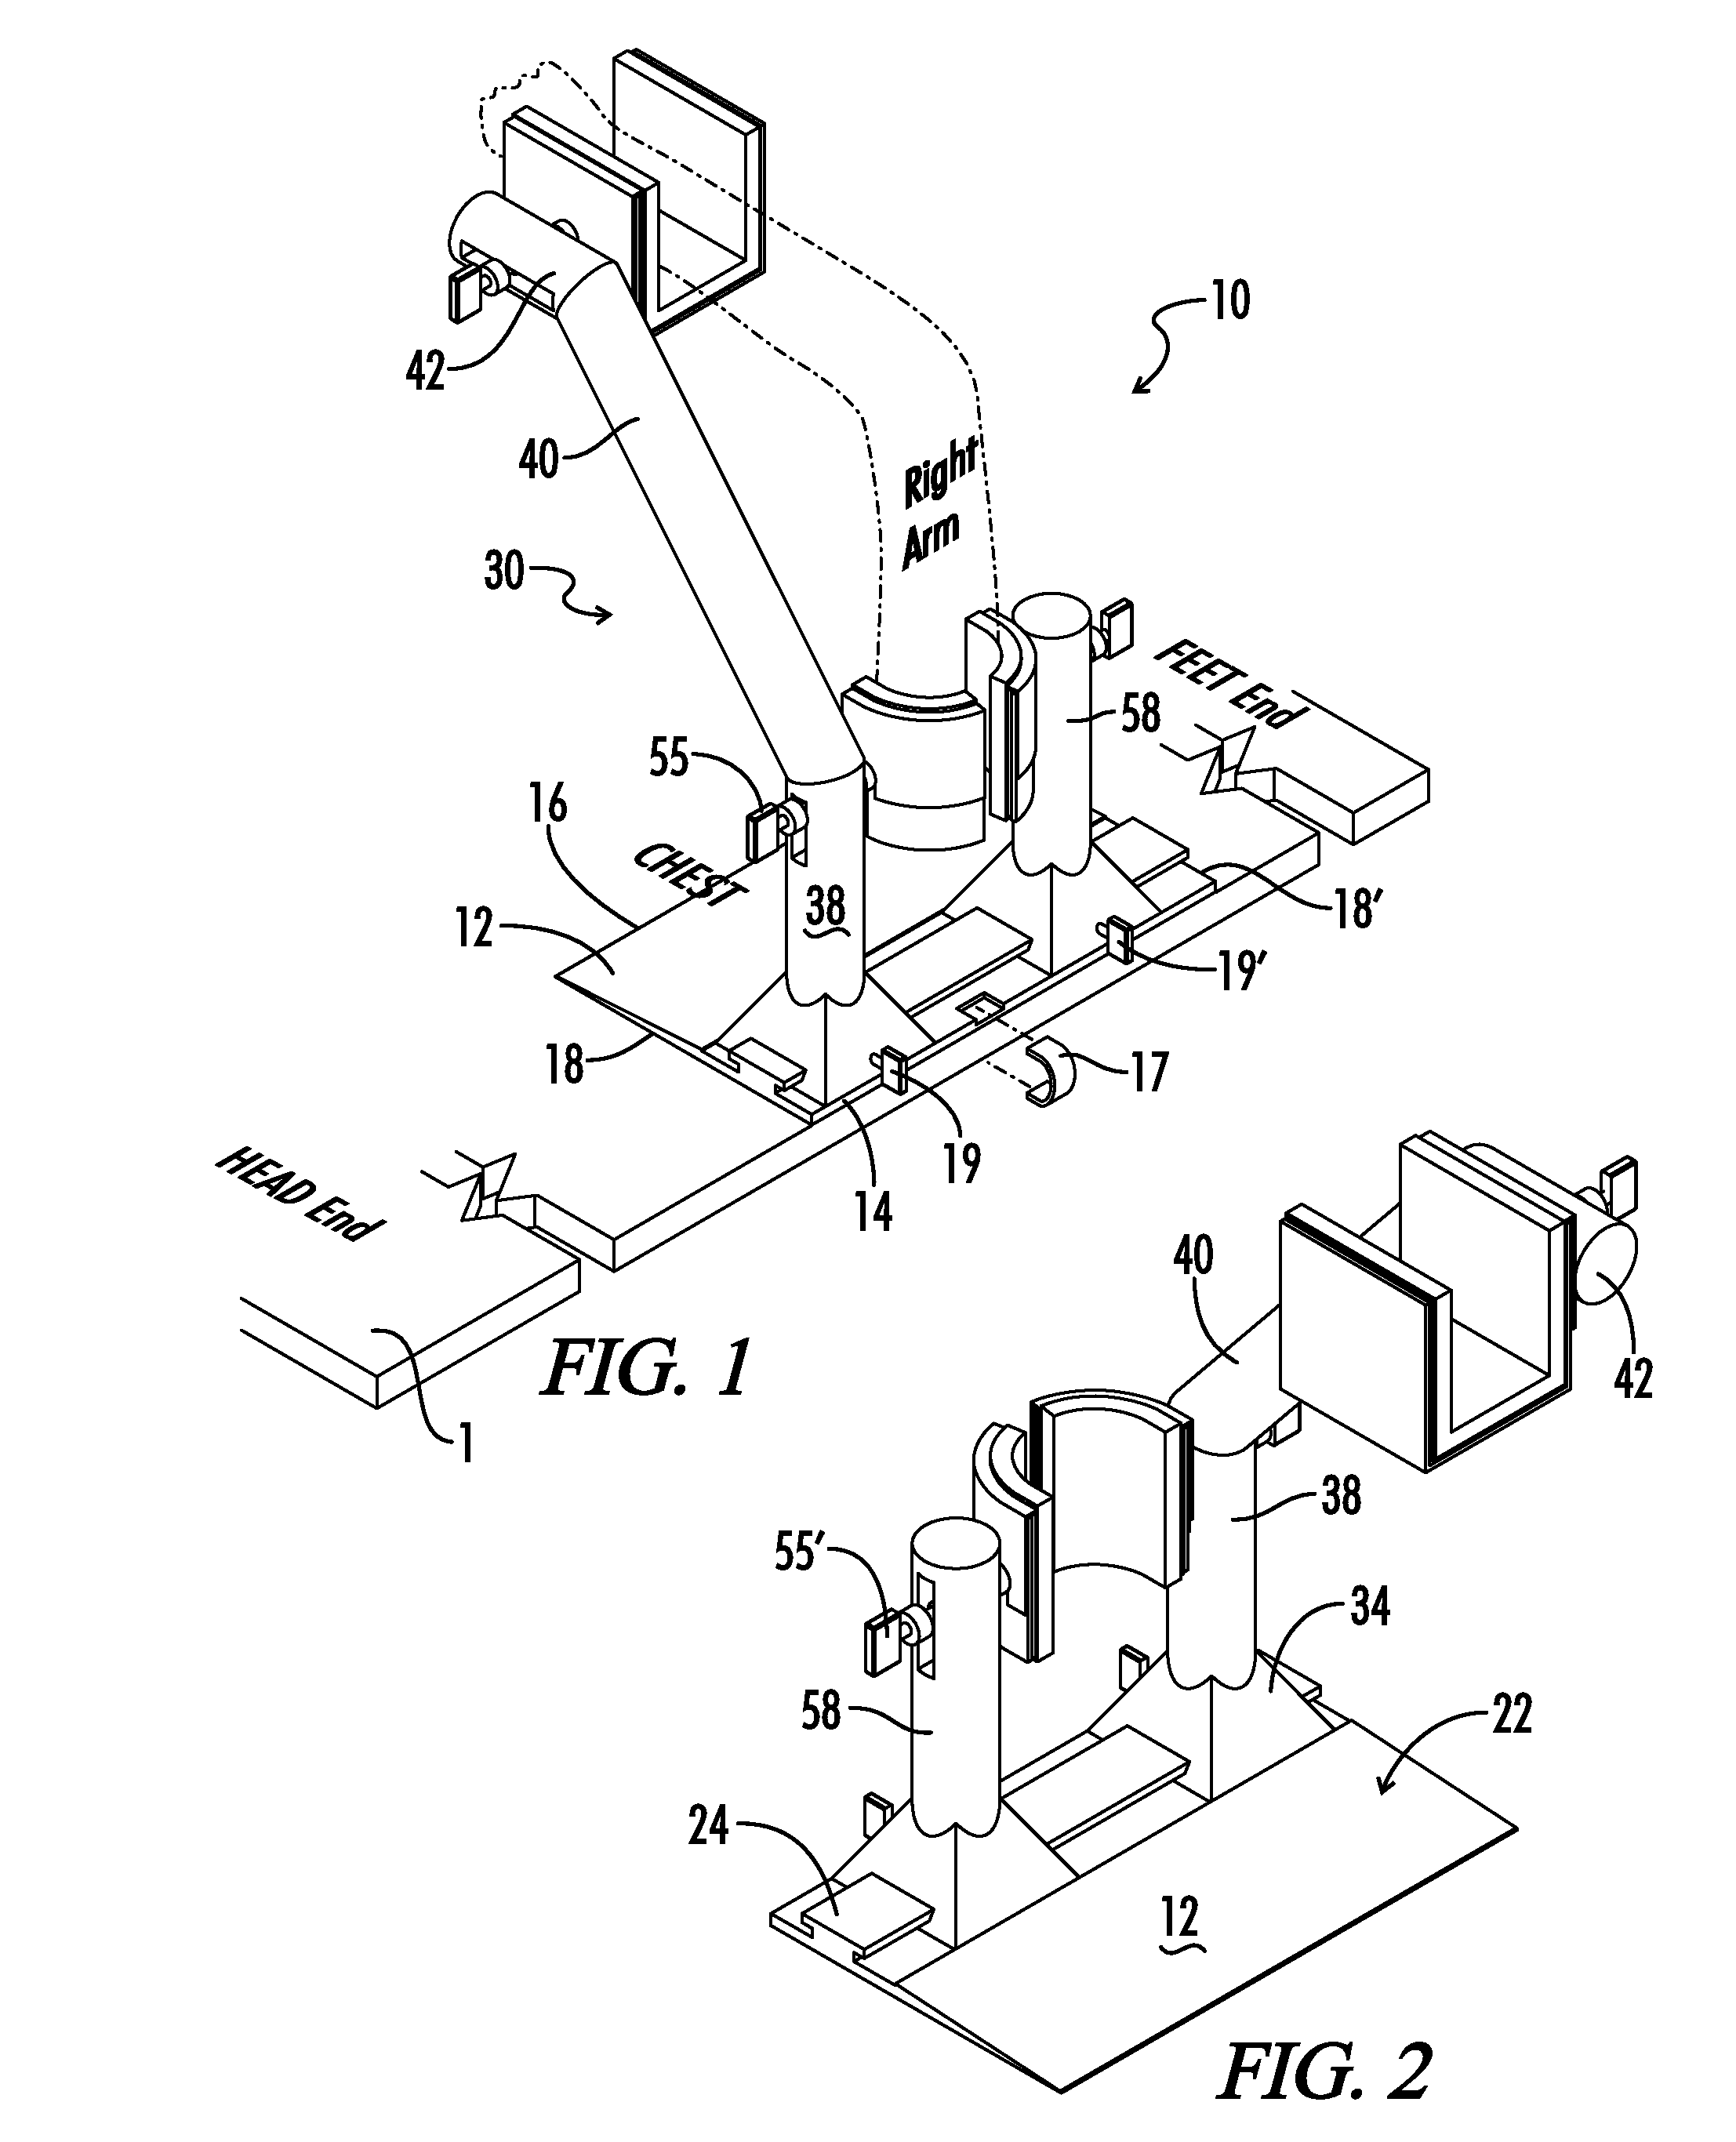 Arm stabilizer for elbow surgical procedure